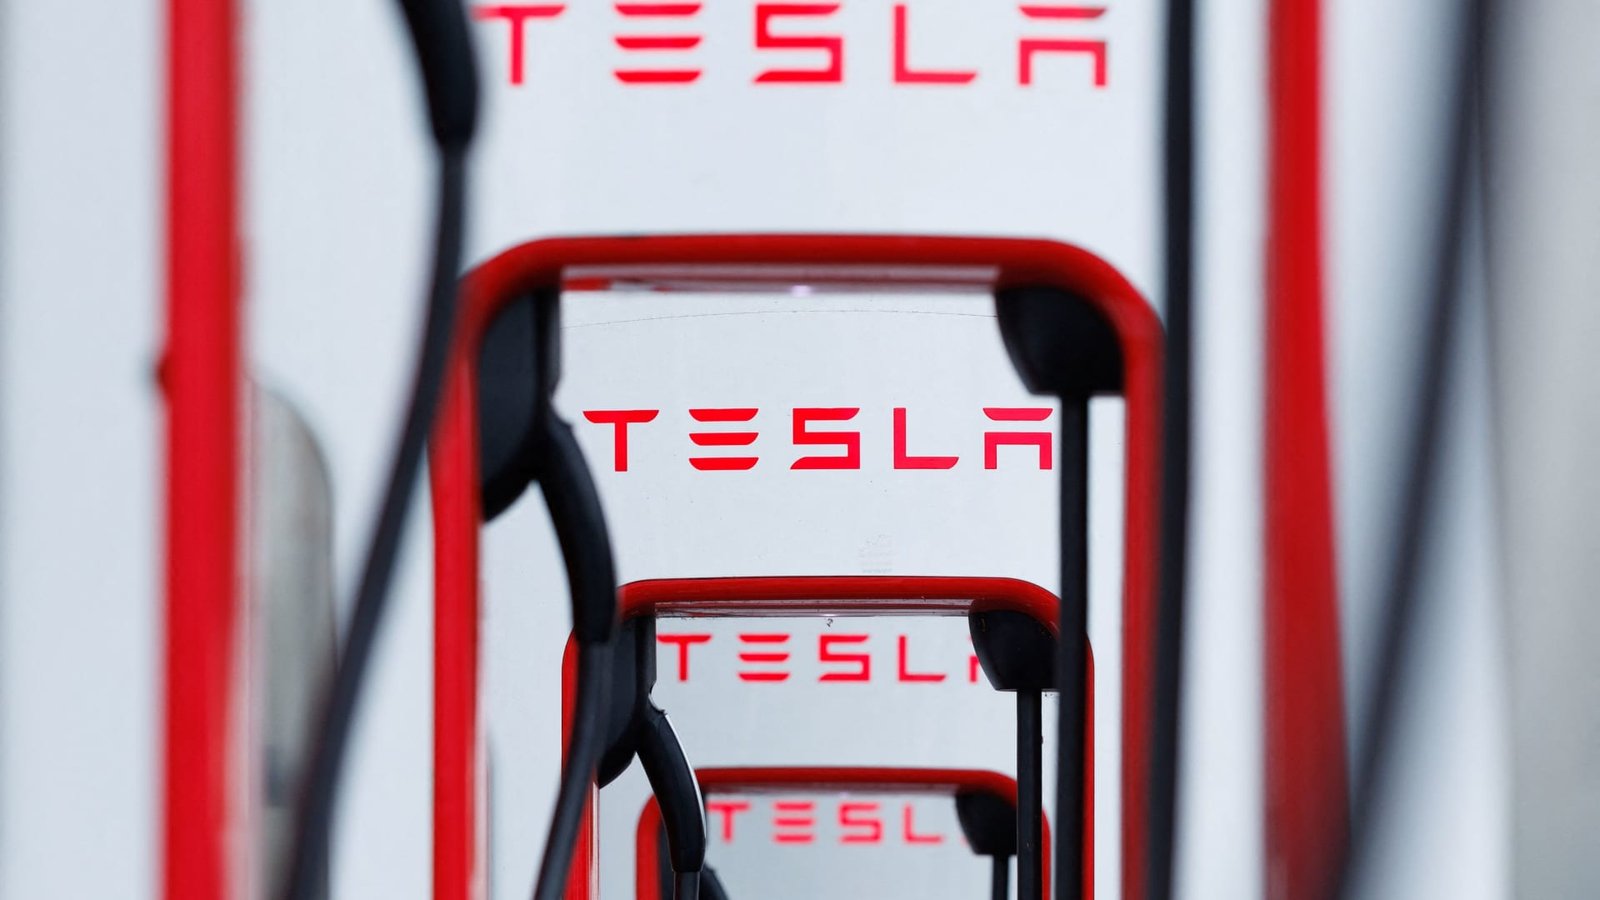 Tesla (TSLA) shares rally after better-than-expected deliveries report